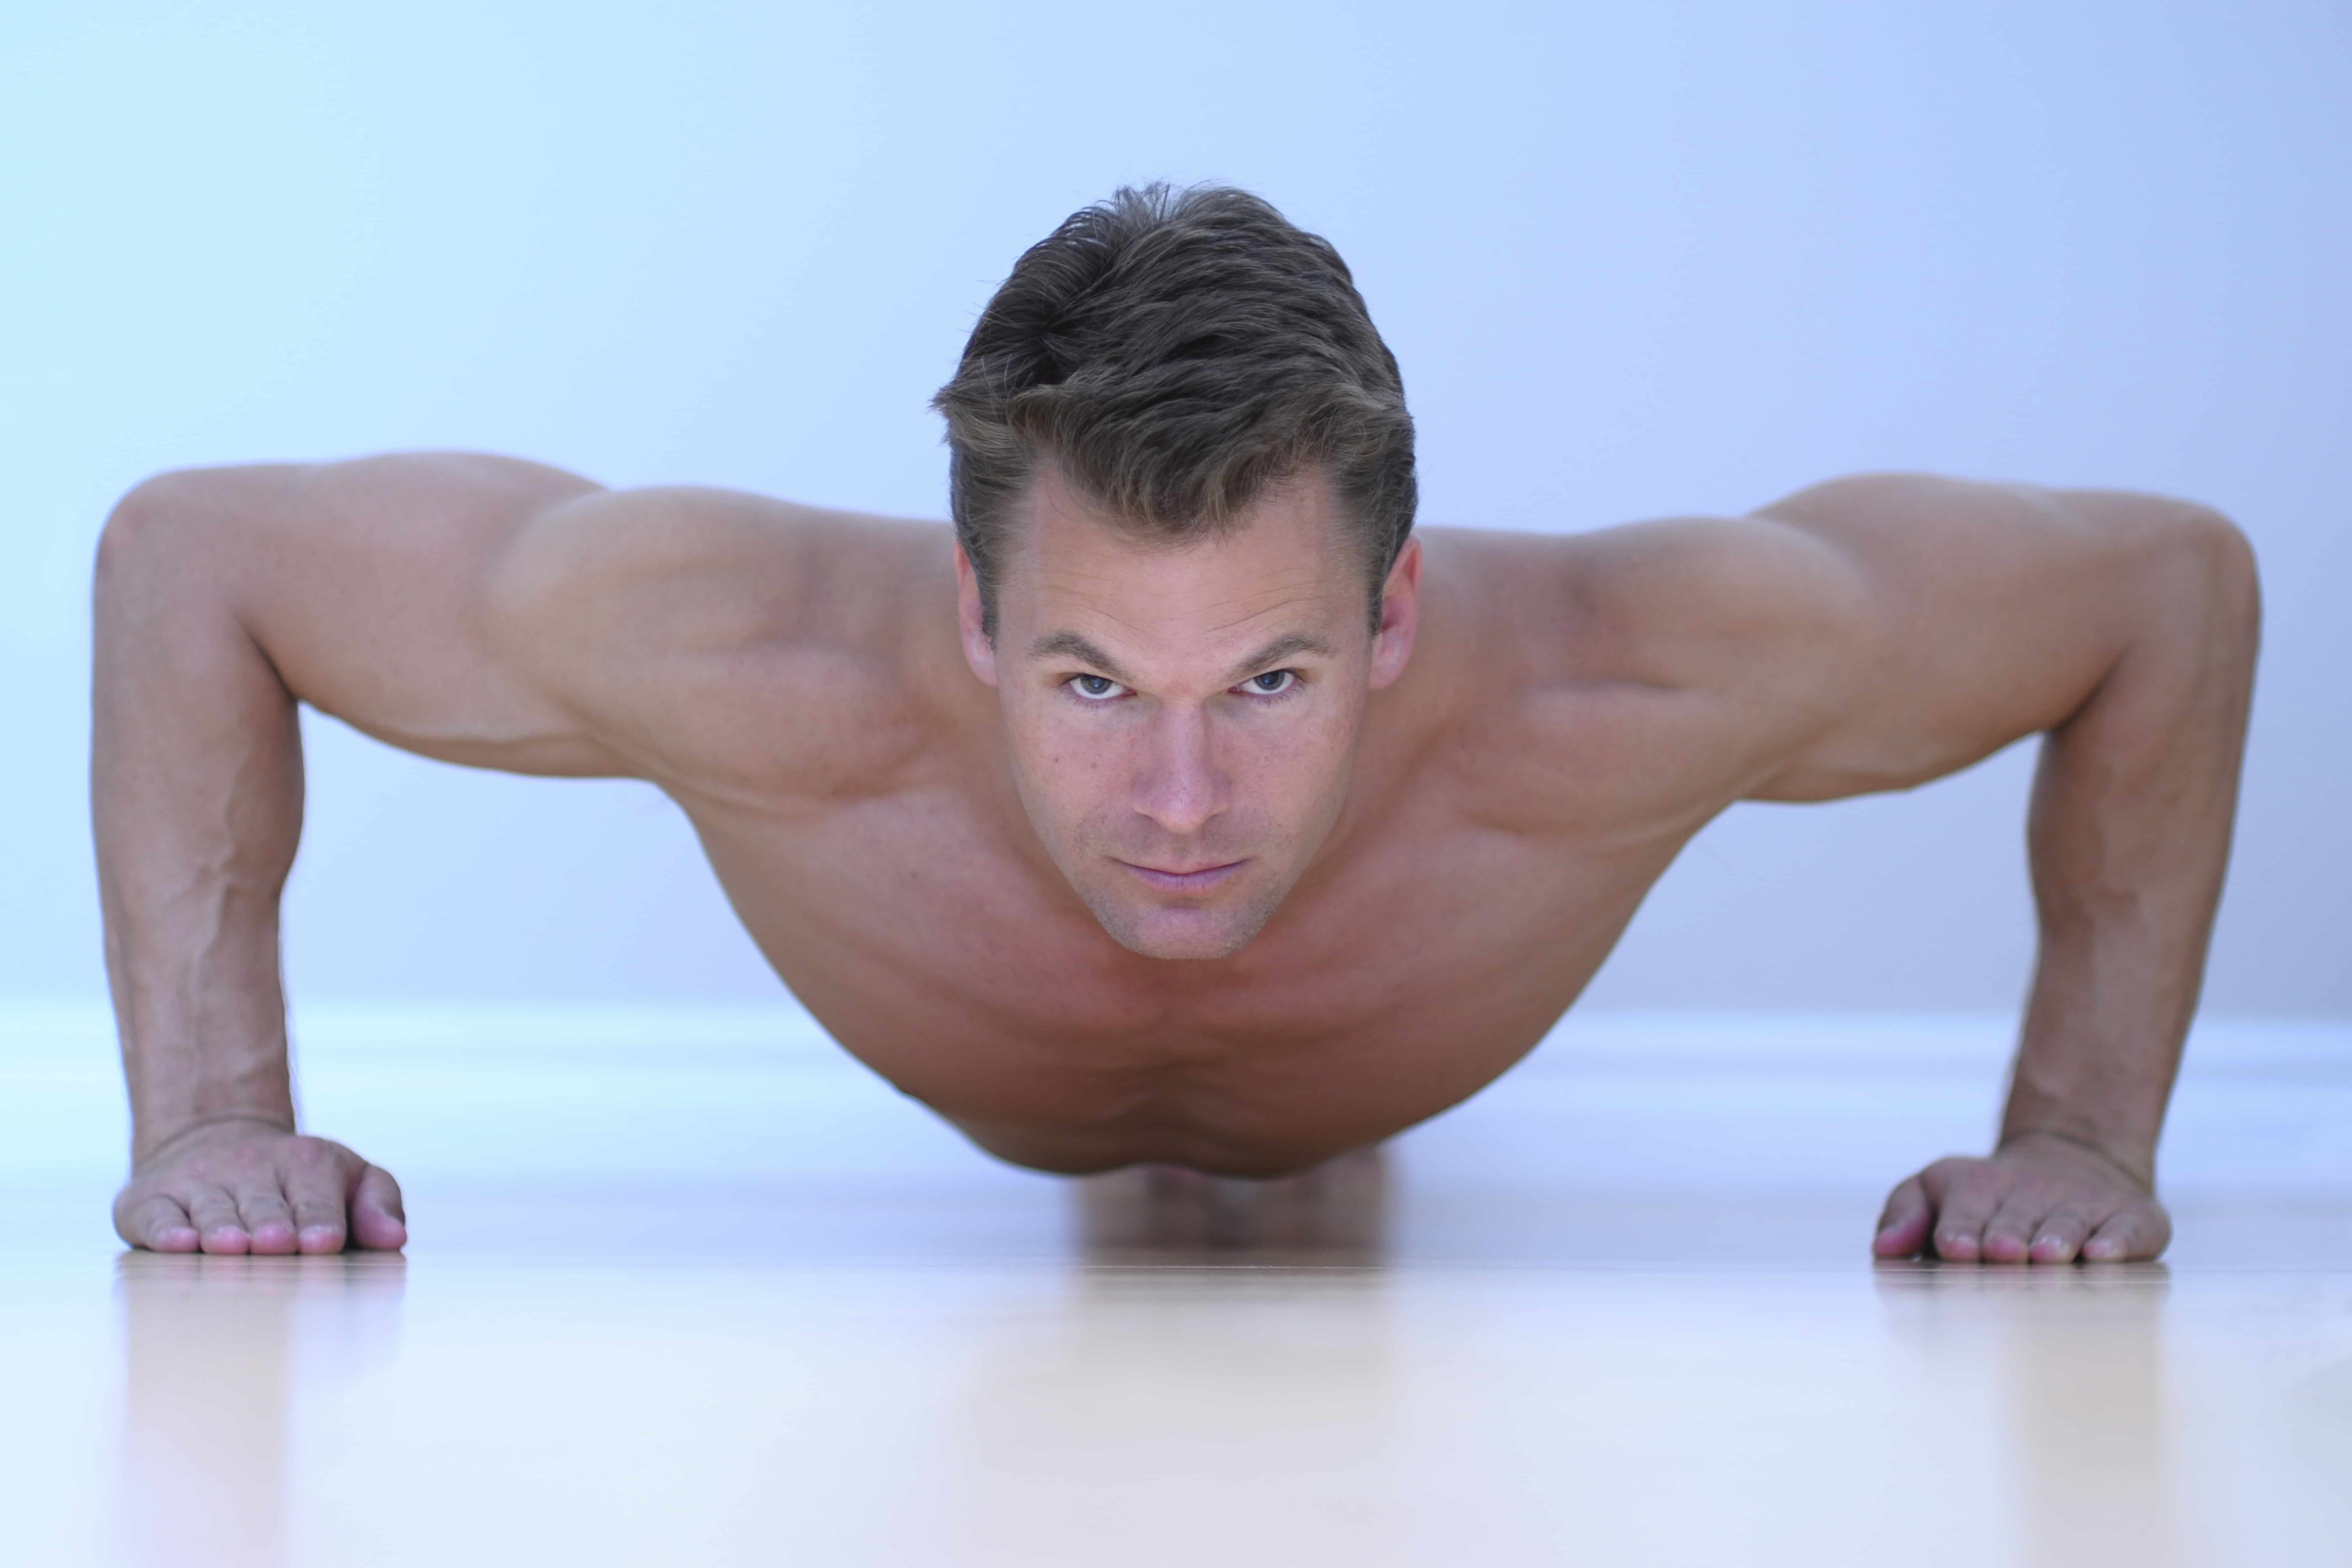 Push ups is a whole body weight exercise